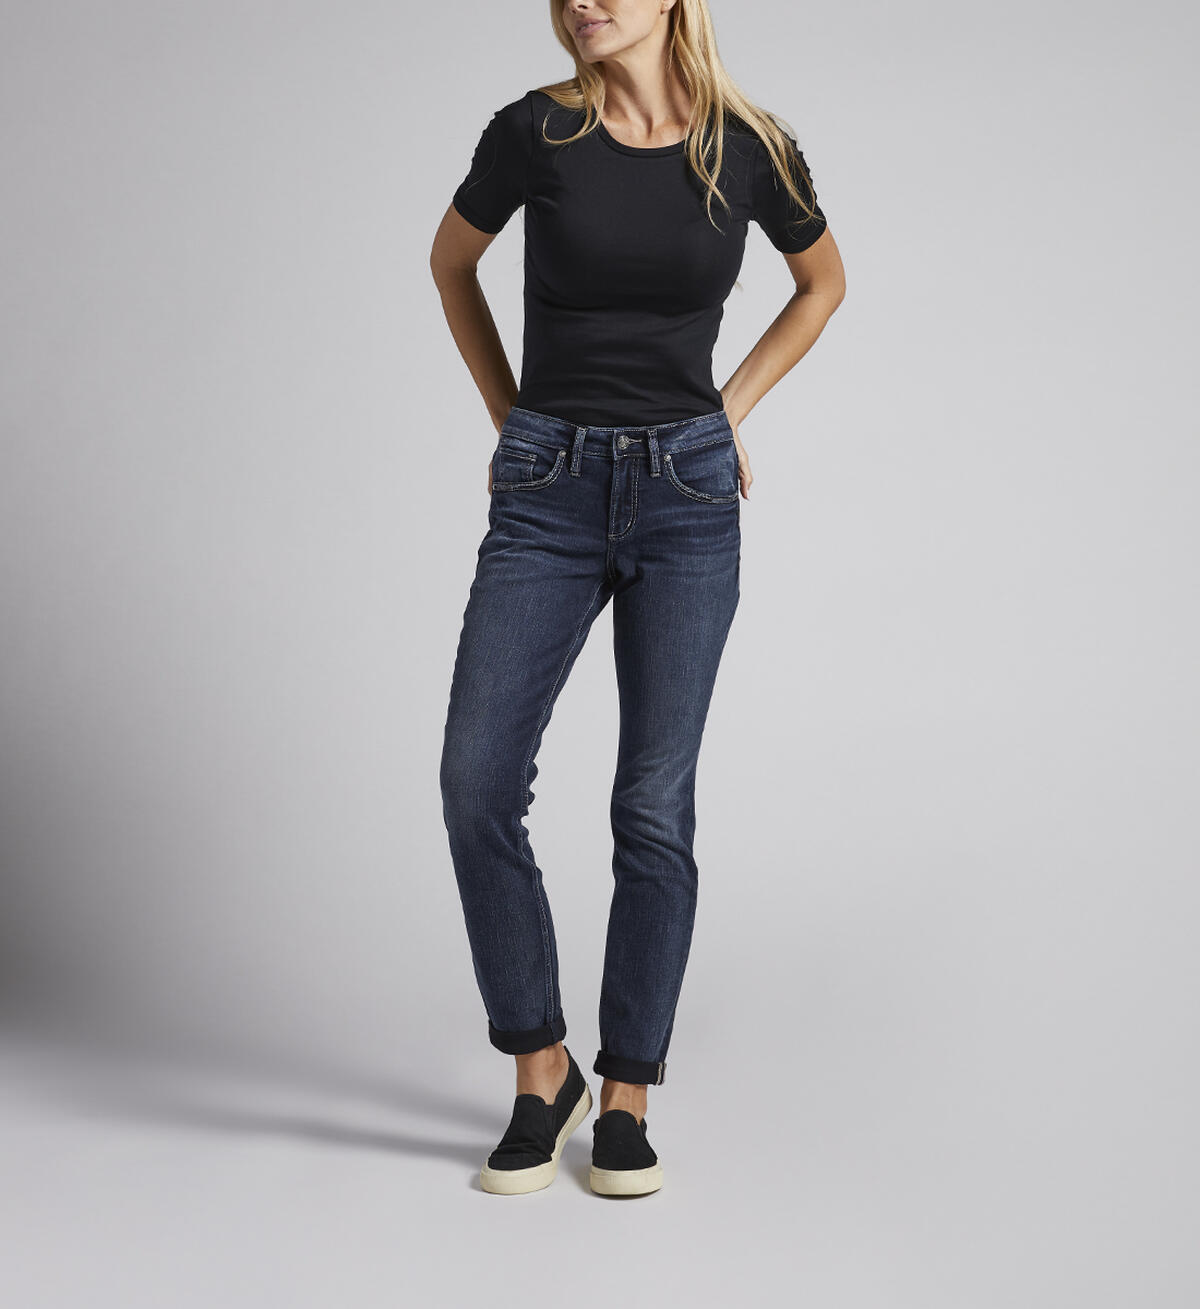 Want to show off your curves, but prefer a relaxed look and feel? The Boyfriend fit features a comfortable, classic mid rise and a no-gap fit that’s built for curvy body types. 